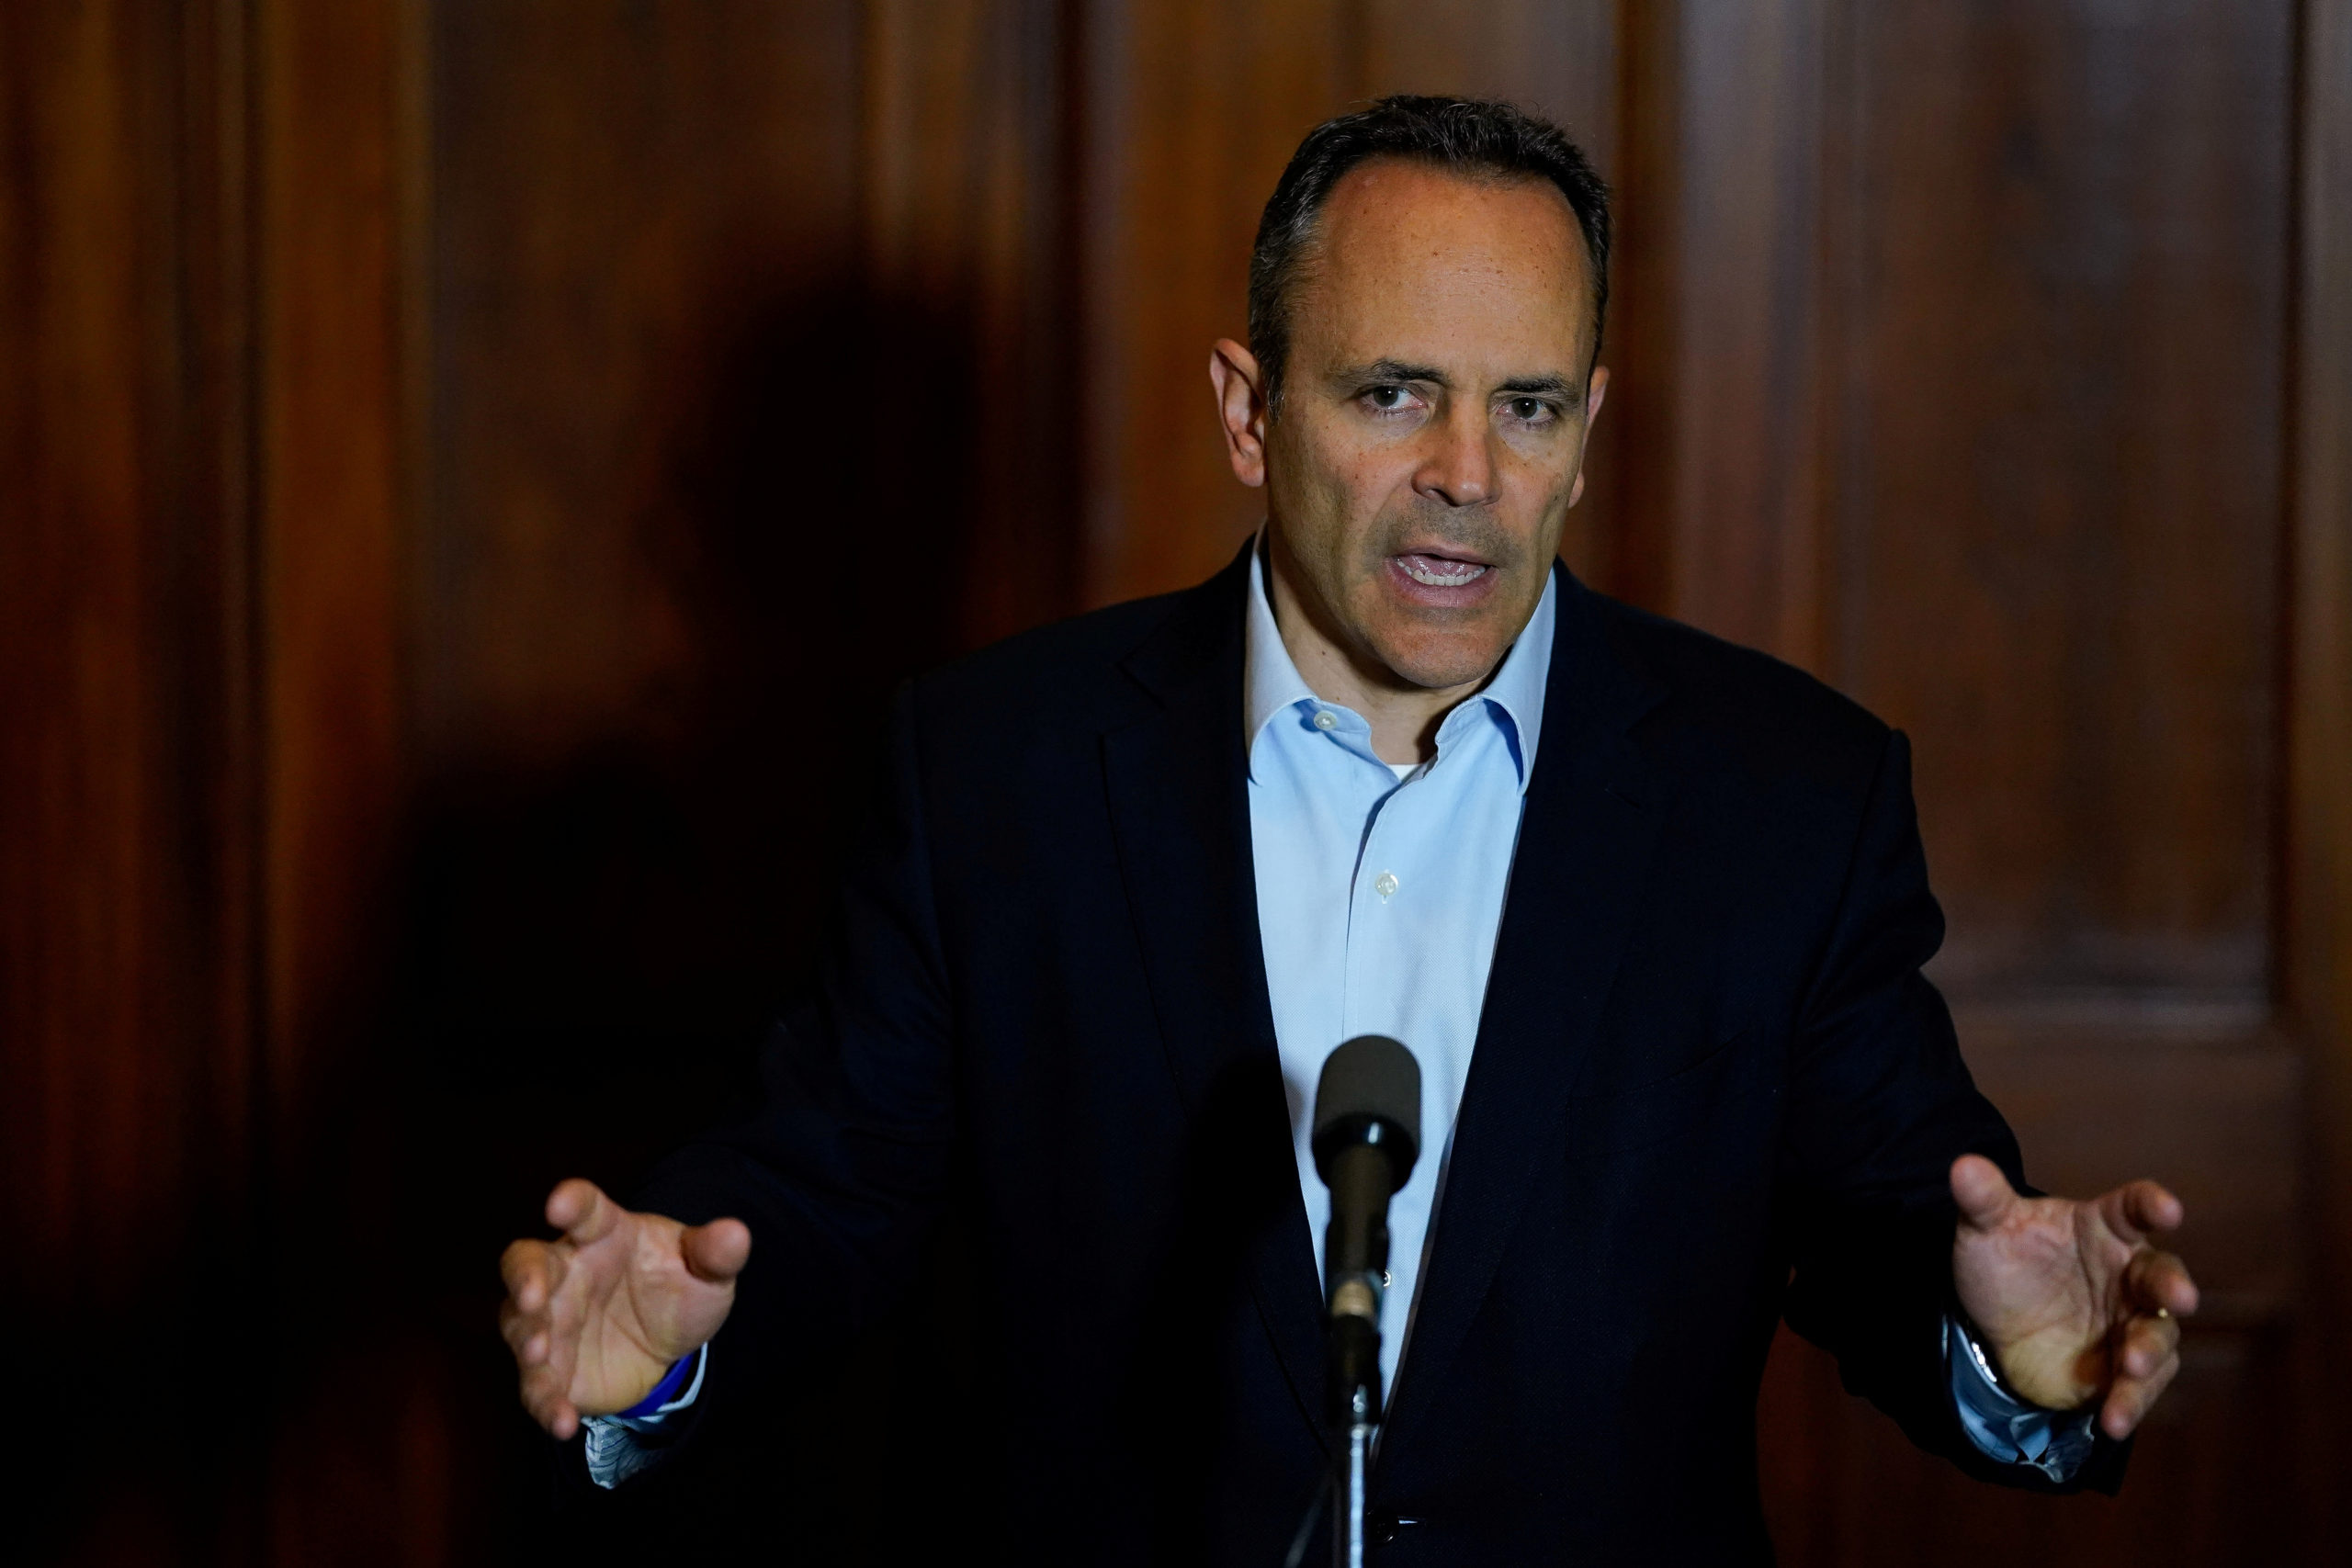 Kentucky Governor Matt Bevin concedes the gubernatorial election, acknowledging that the recanvass of votes will not offer him a path to victory during a press conference at the Capitol Building in Frankfort, Kentucky, U.S., November 14, 2019. REUTERS/Bryan Woolston